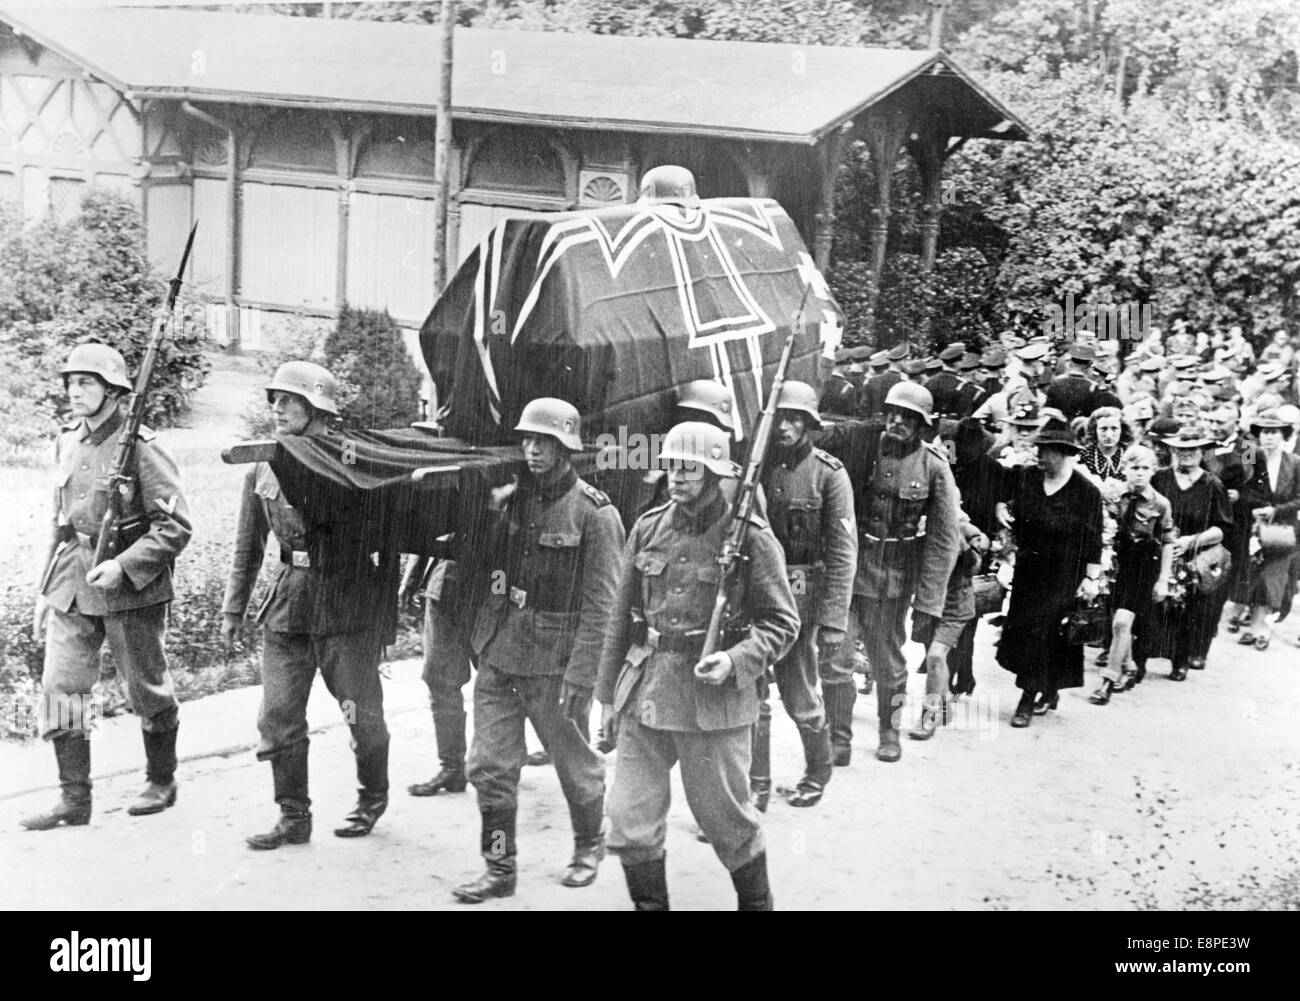 The burial of the murdered SA man Joseph Wessel in the Nazi controlled Danzig, Poland, 28 August 1939. The Nazi news report on the back of the picture reads: 'The funeral of murdered SA man Josef Wessel. Last Monday, the funeral of the SA man and state police officer Josef Wessel, who was shot by a Polish band of murderers took place at the Garrison Cemetery in Gdansk. The funeral procession. The coffin was carried by his comrades to the crypt. The flag of Danzig and the helmet of the murdered man was placed on the coffin.' Fotoarchiv für Zeitgeschichtee - NO WIRE SERVICE Stock Photo